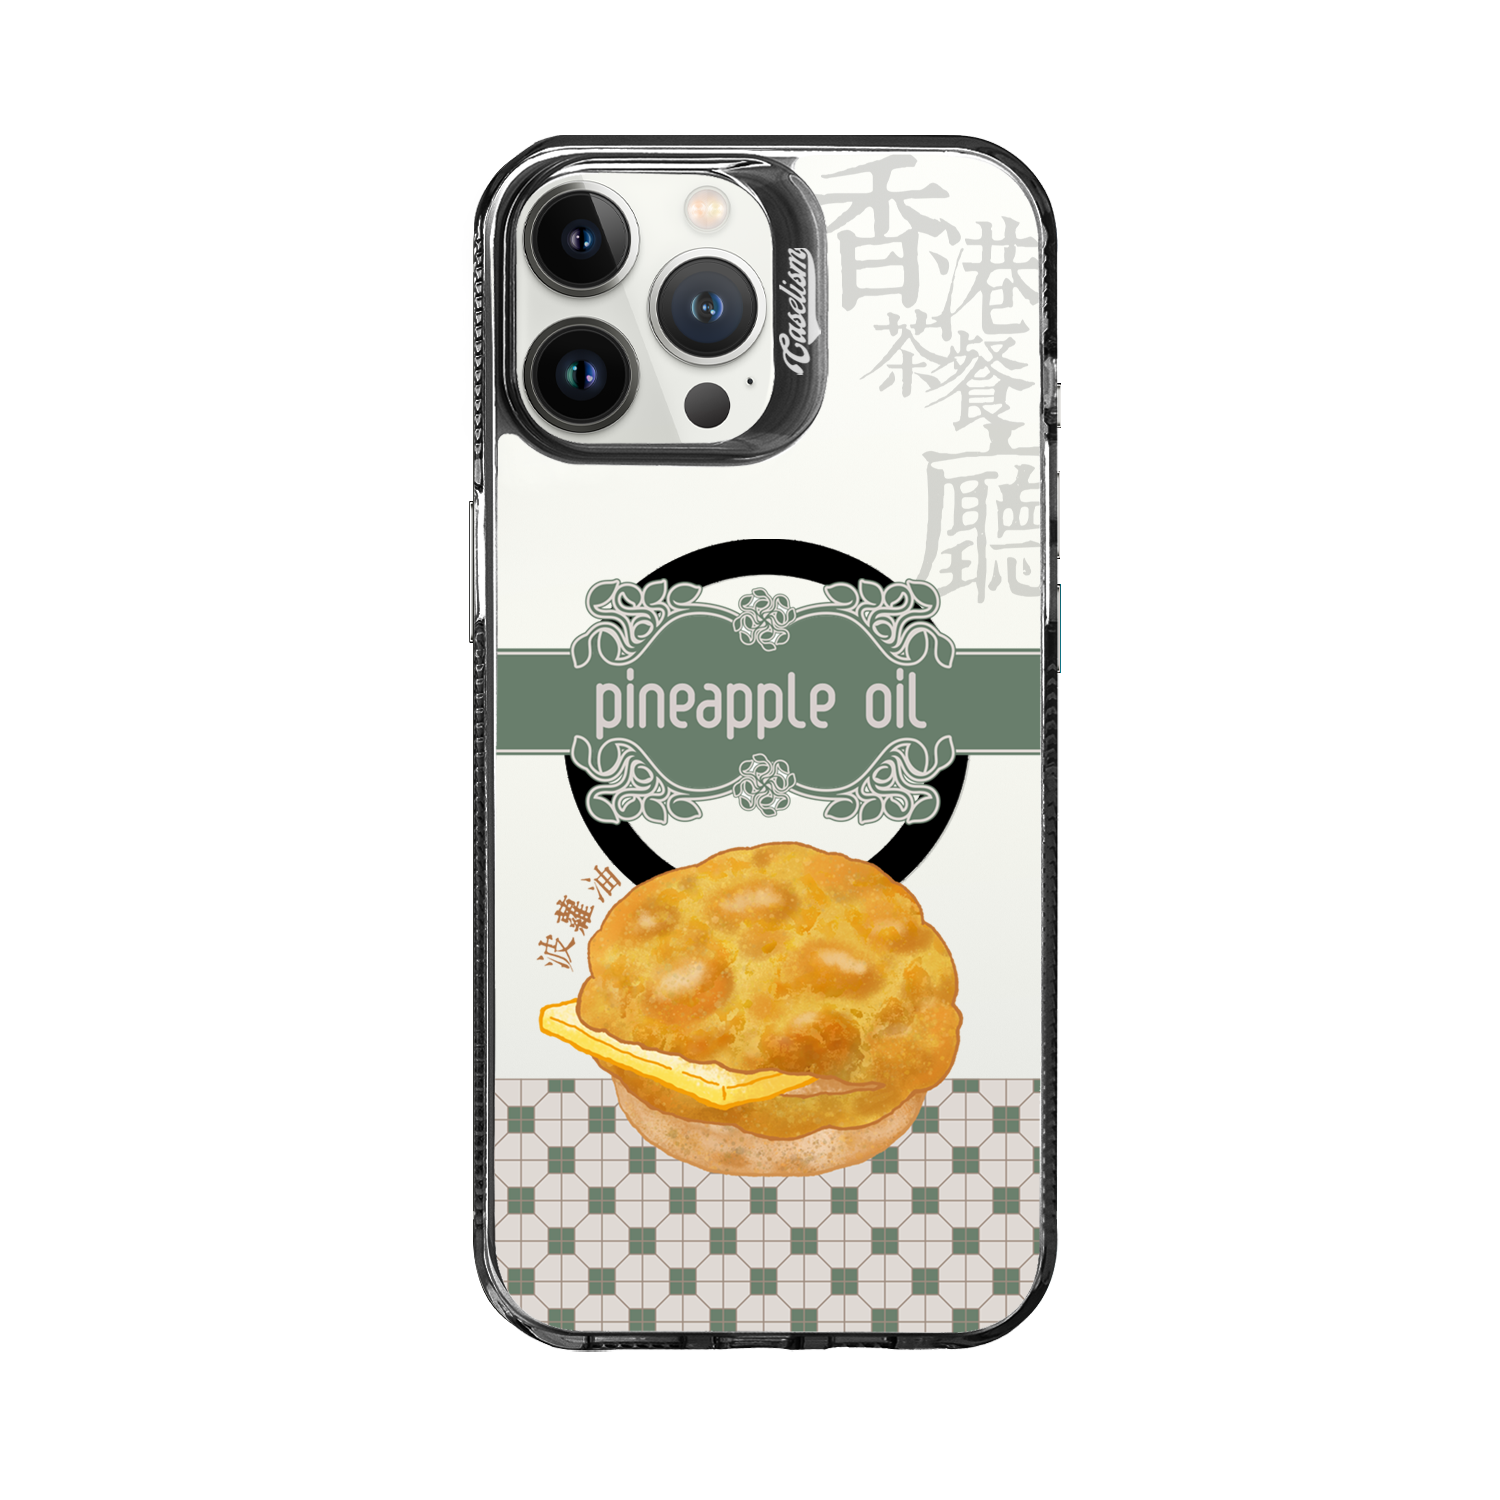 CAFE003 - ColorLite Case for iPhone